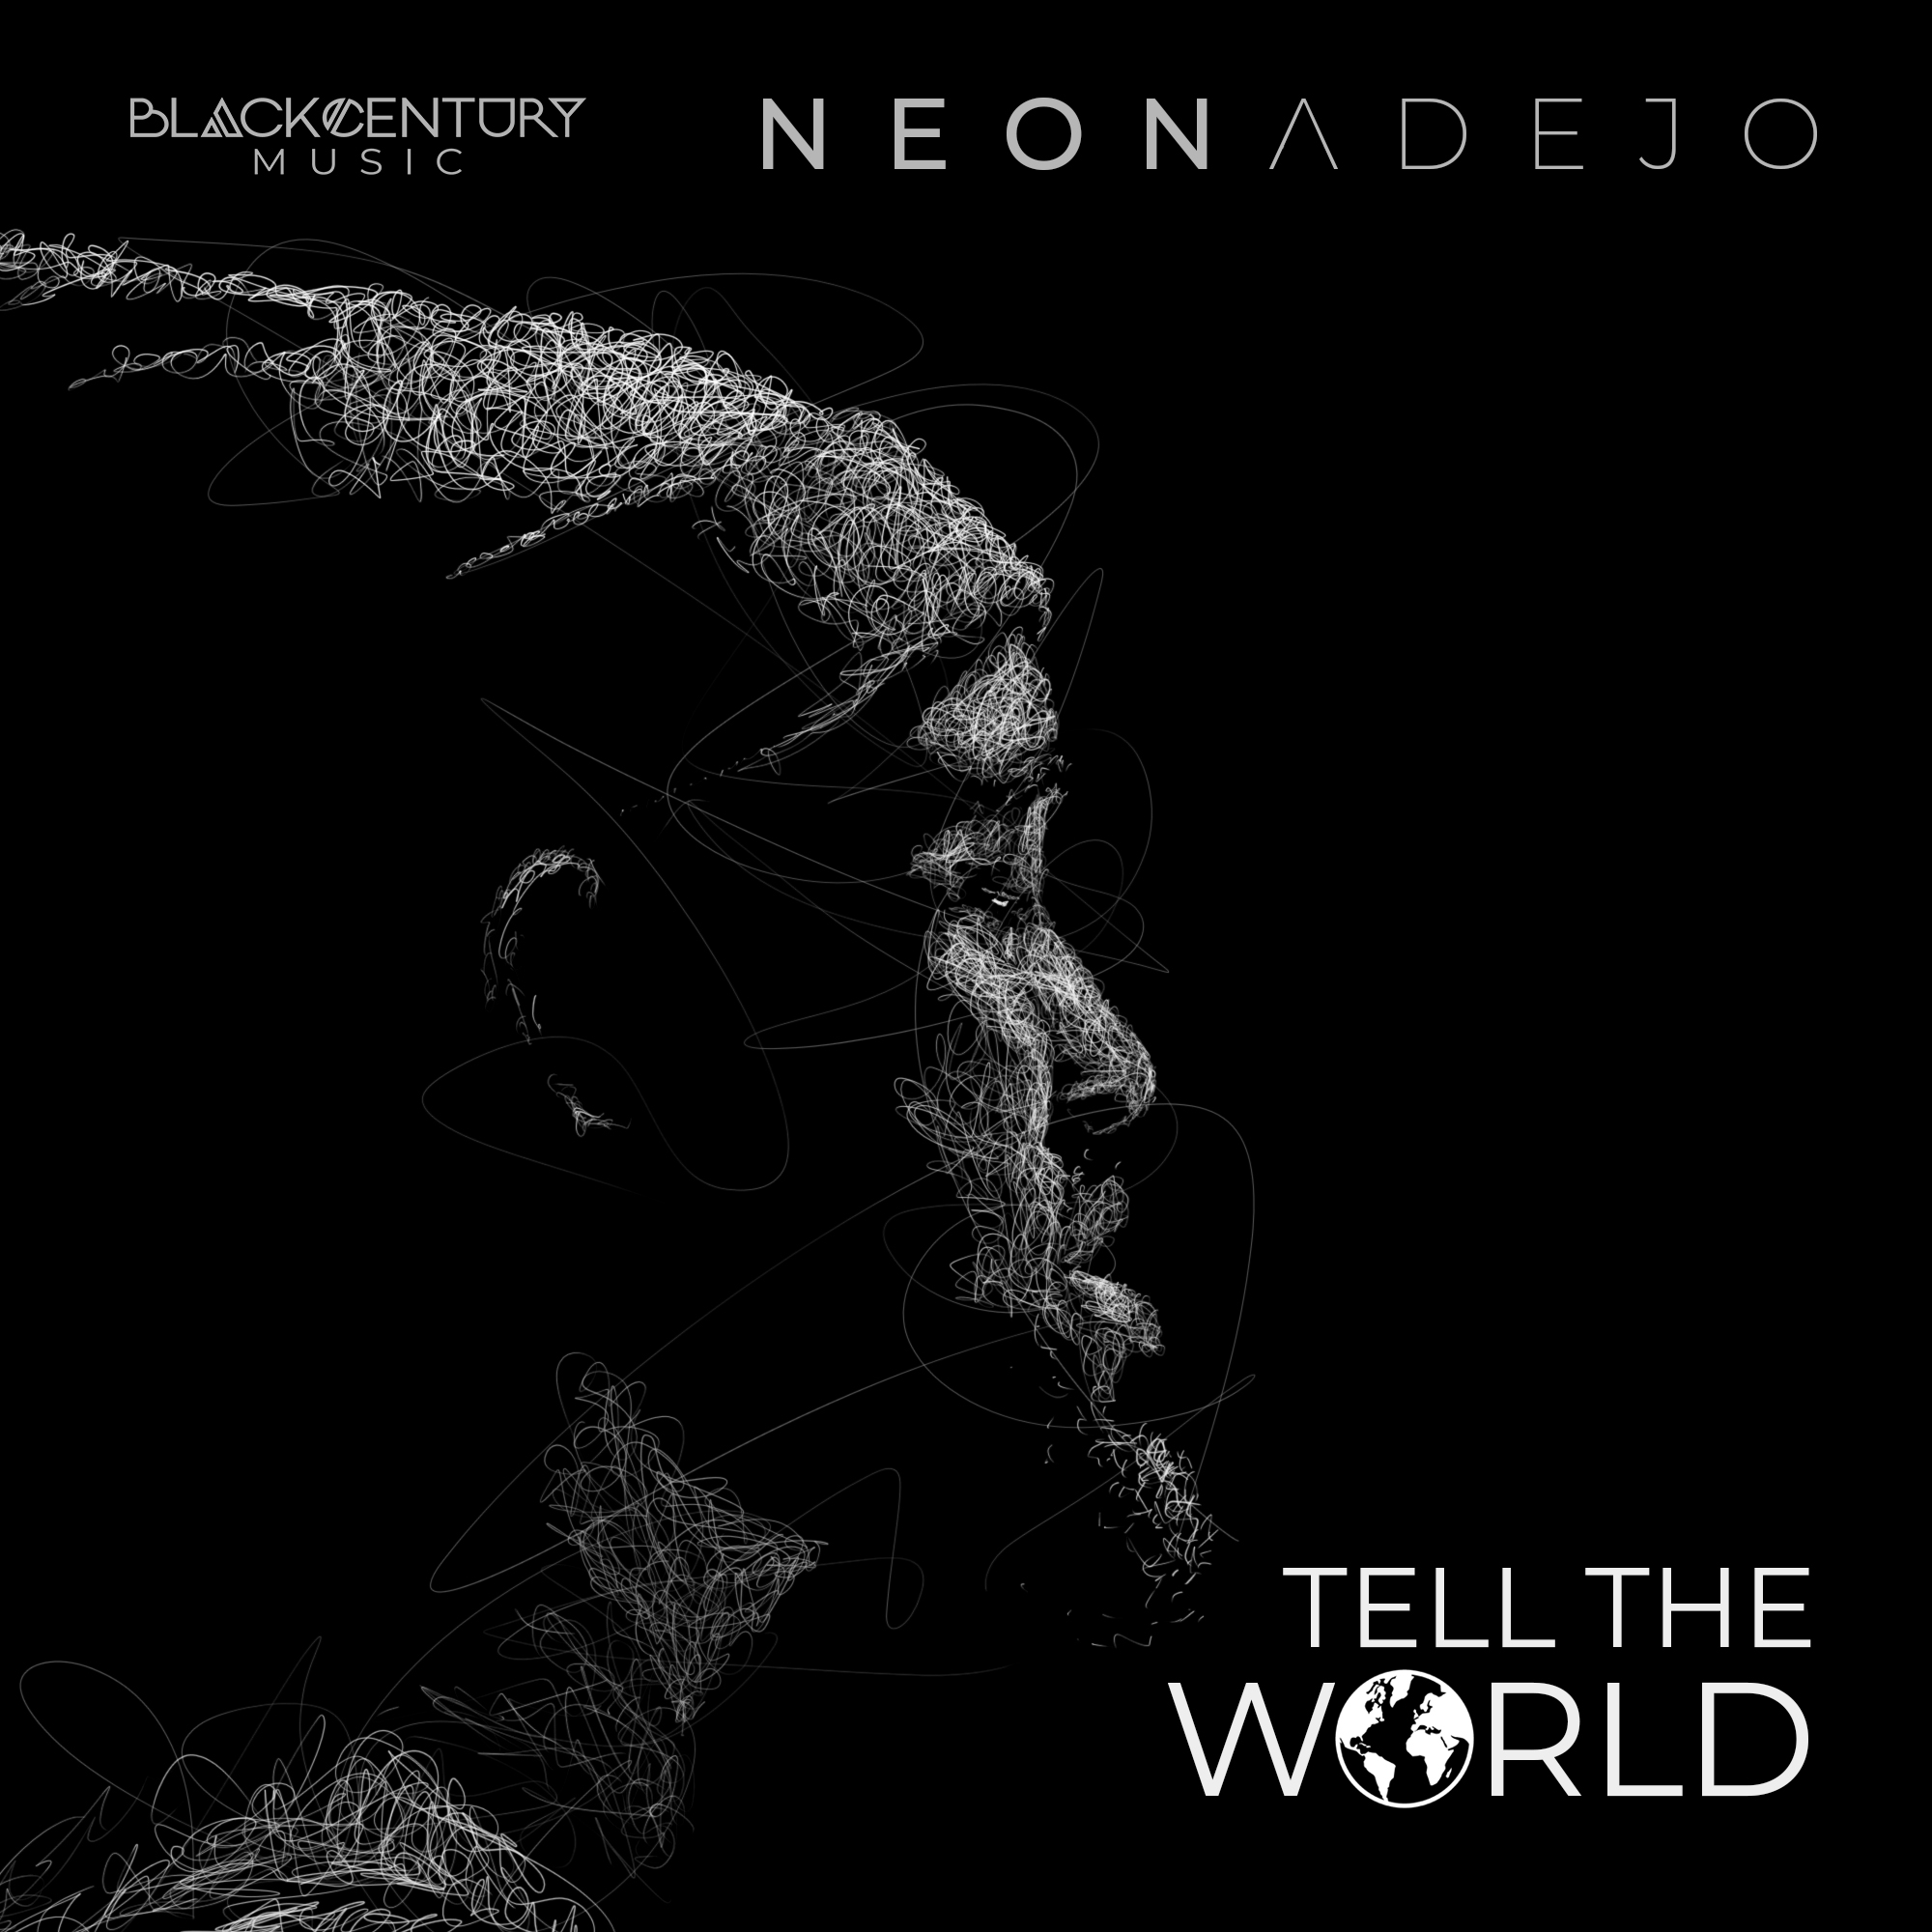 Art for Tell the World || gospelcentric.net by Neon Adejo